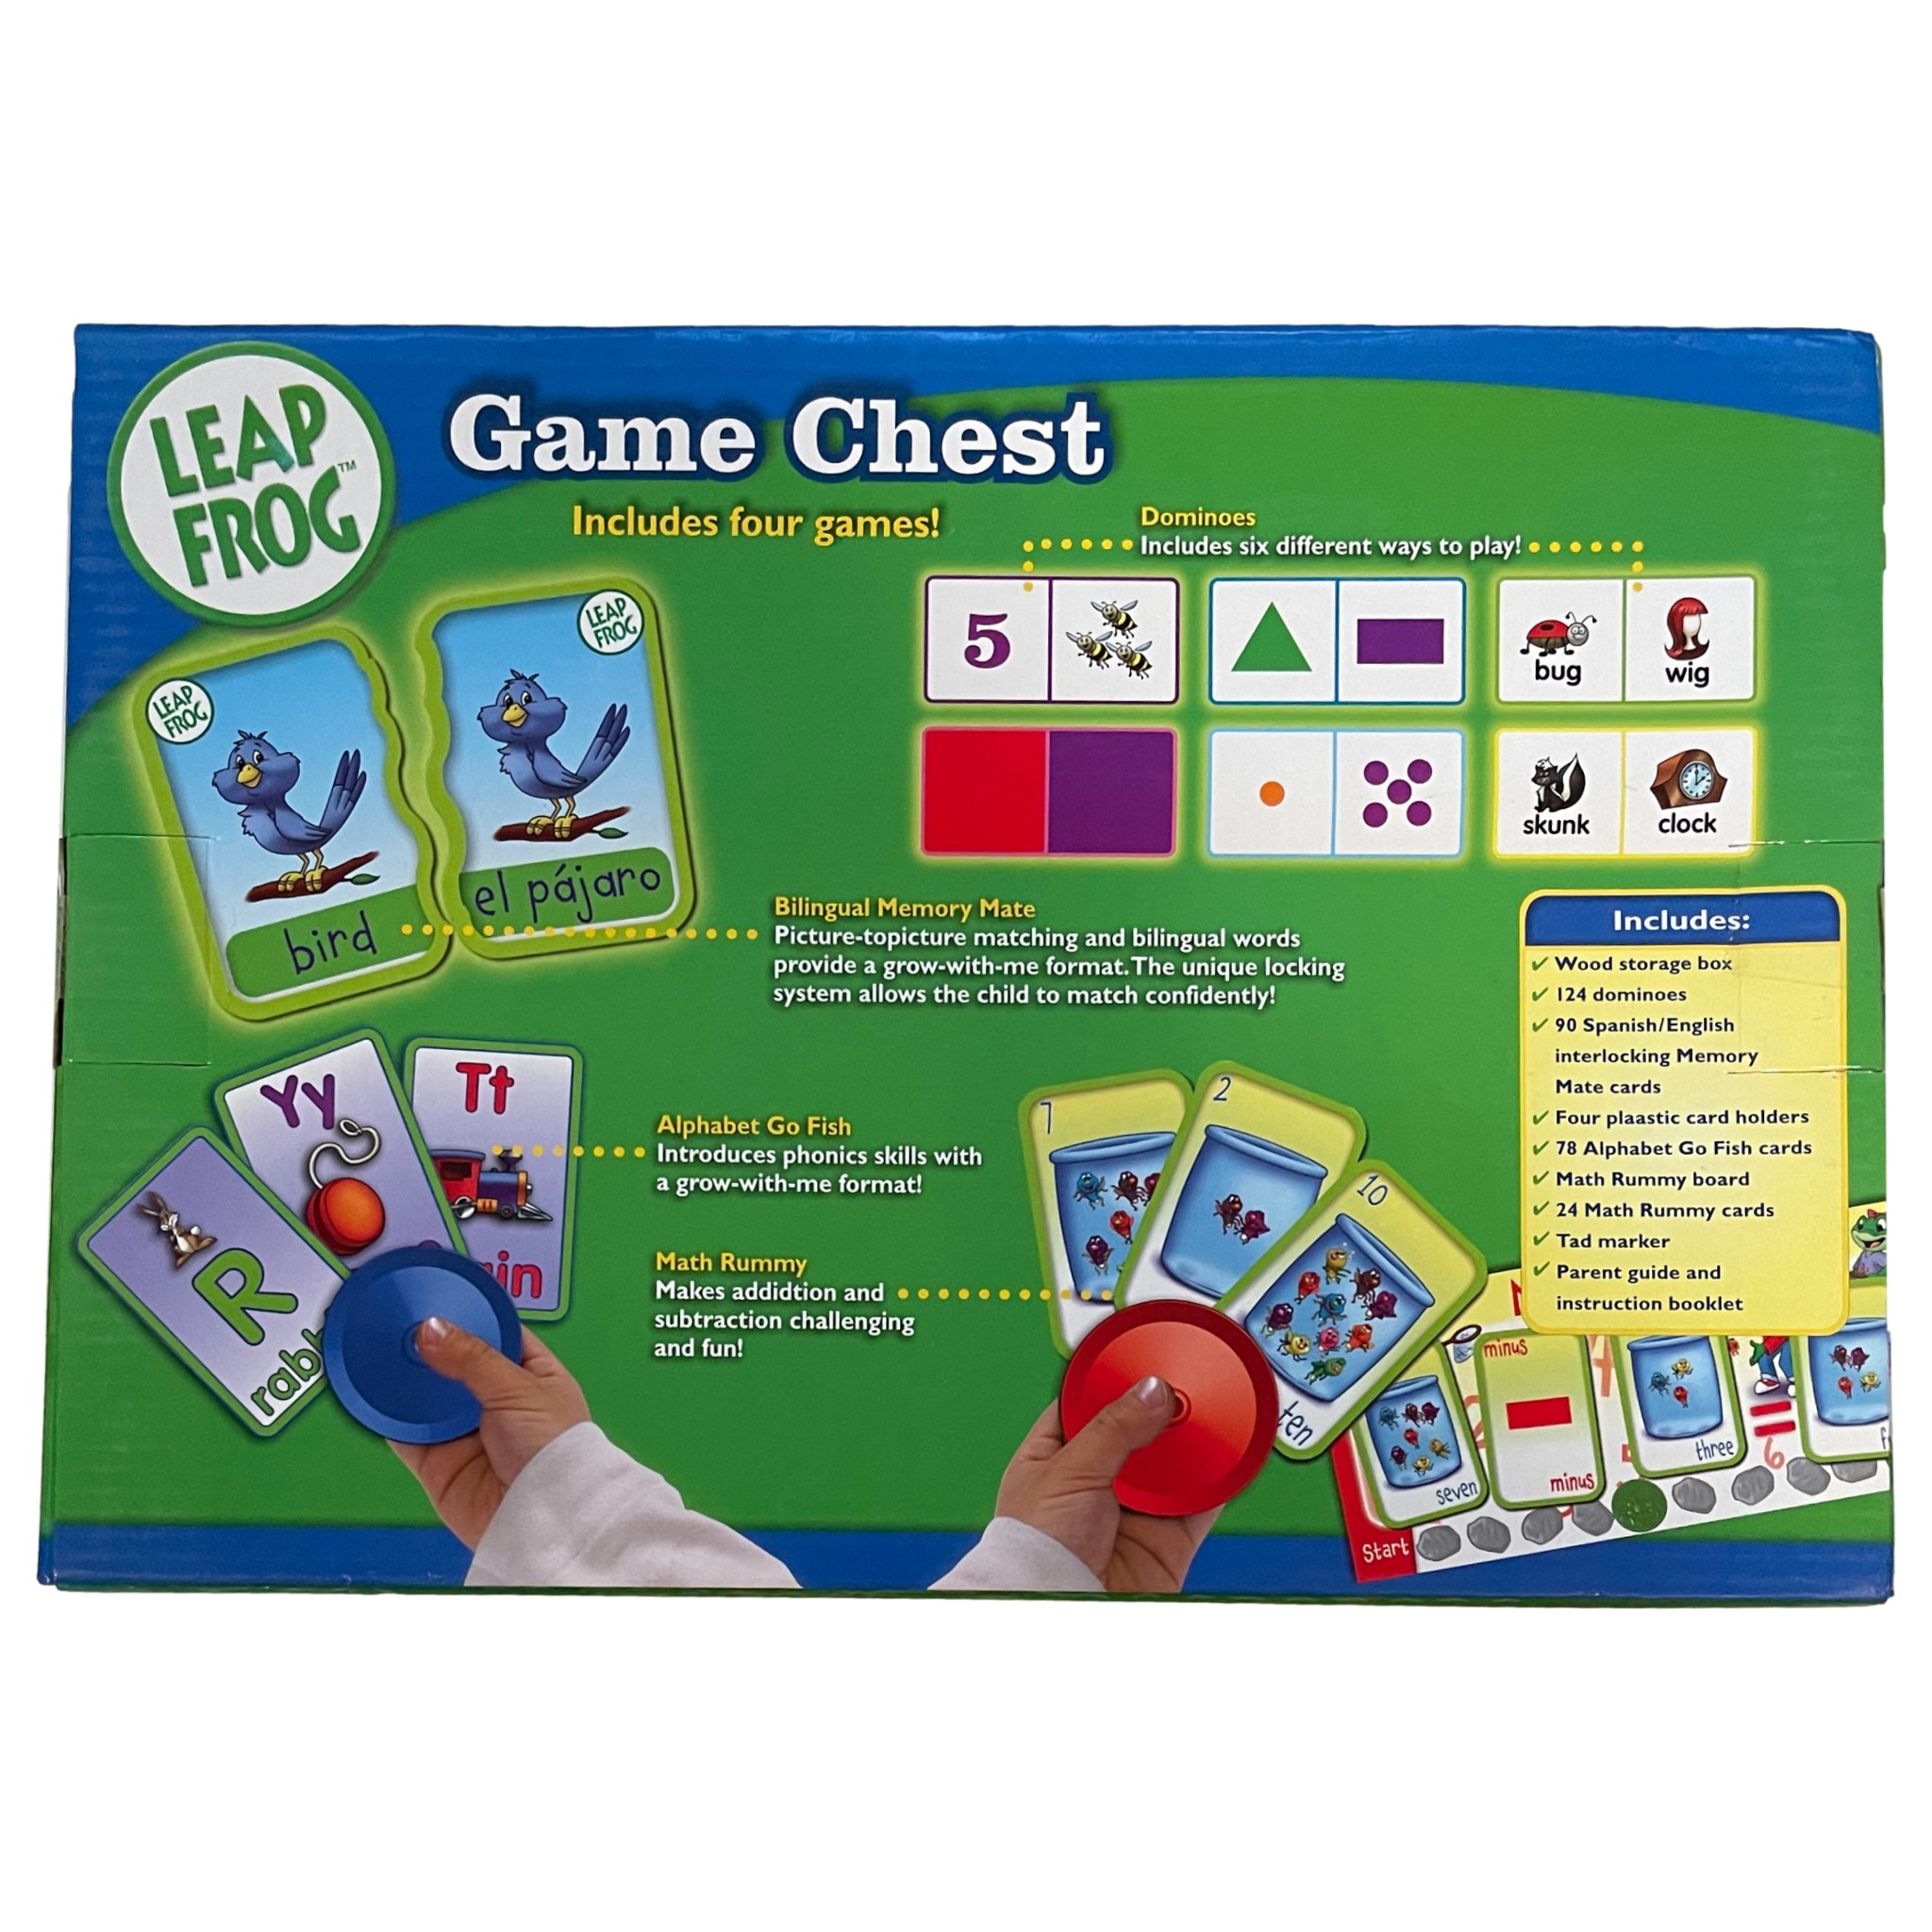 Leap Frog Game Chest with 4 Games Dominoes Math Rummy Alphabet Go Fish Wood Box - image 2 of 2